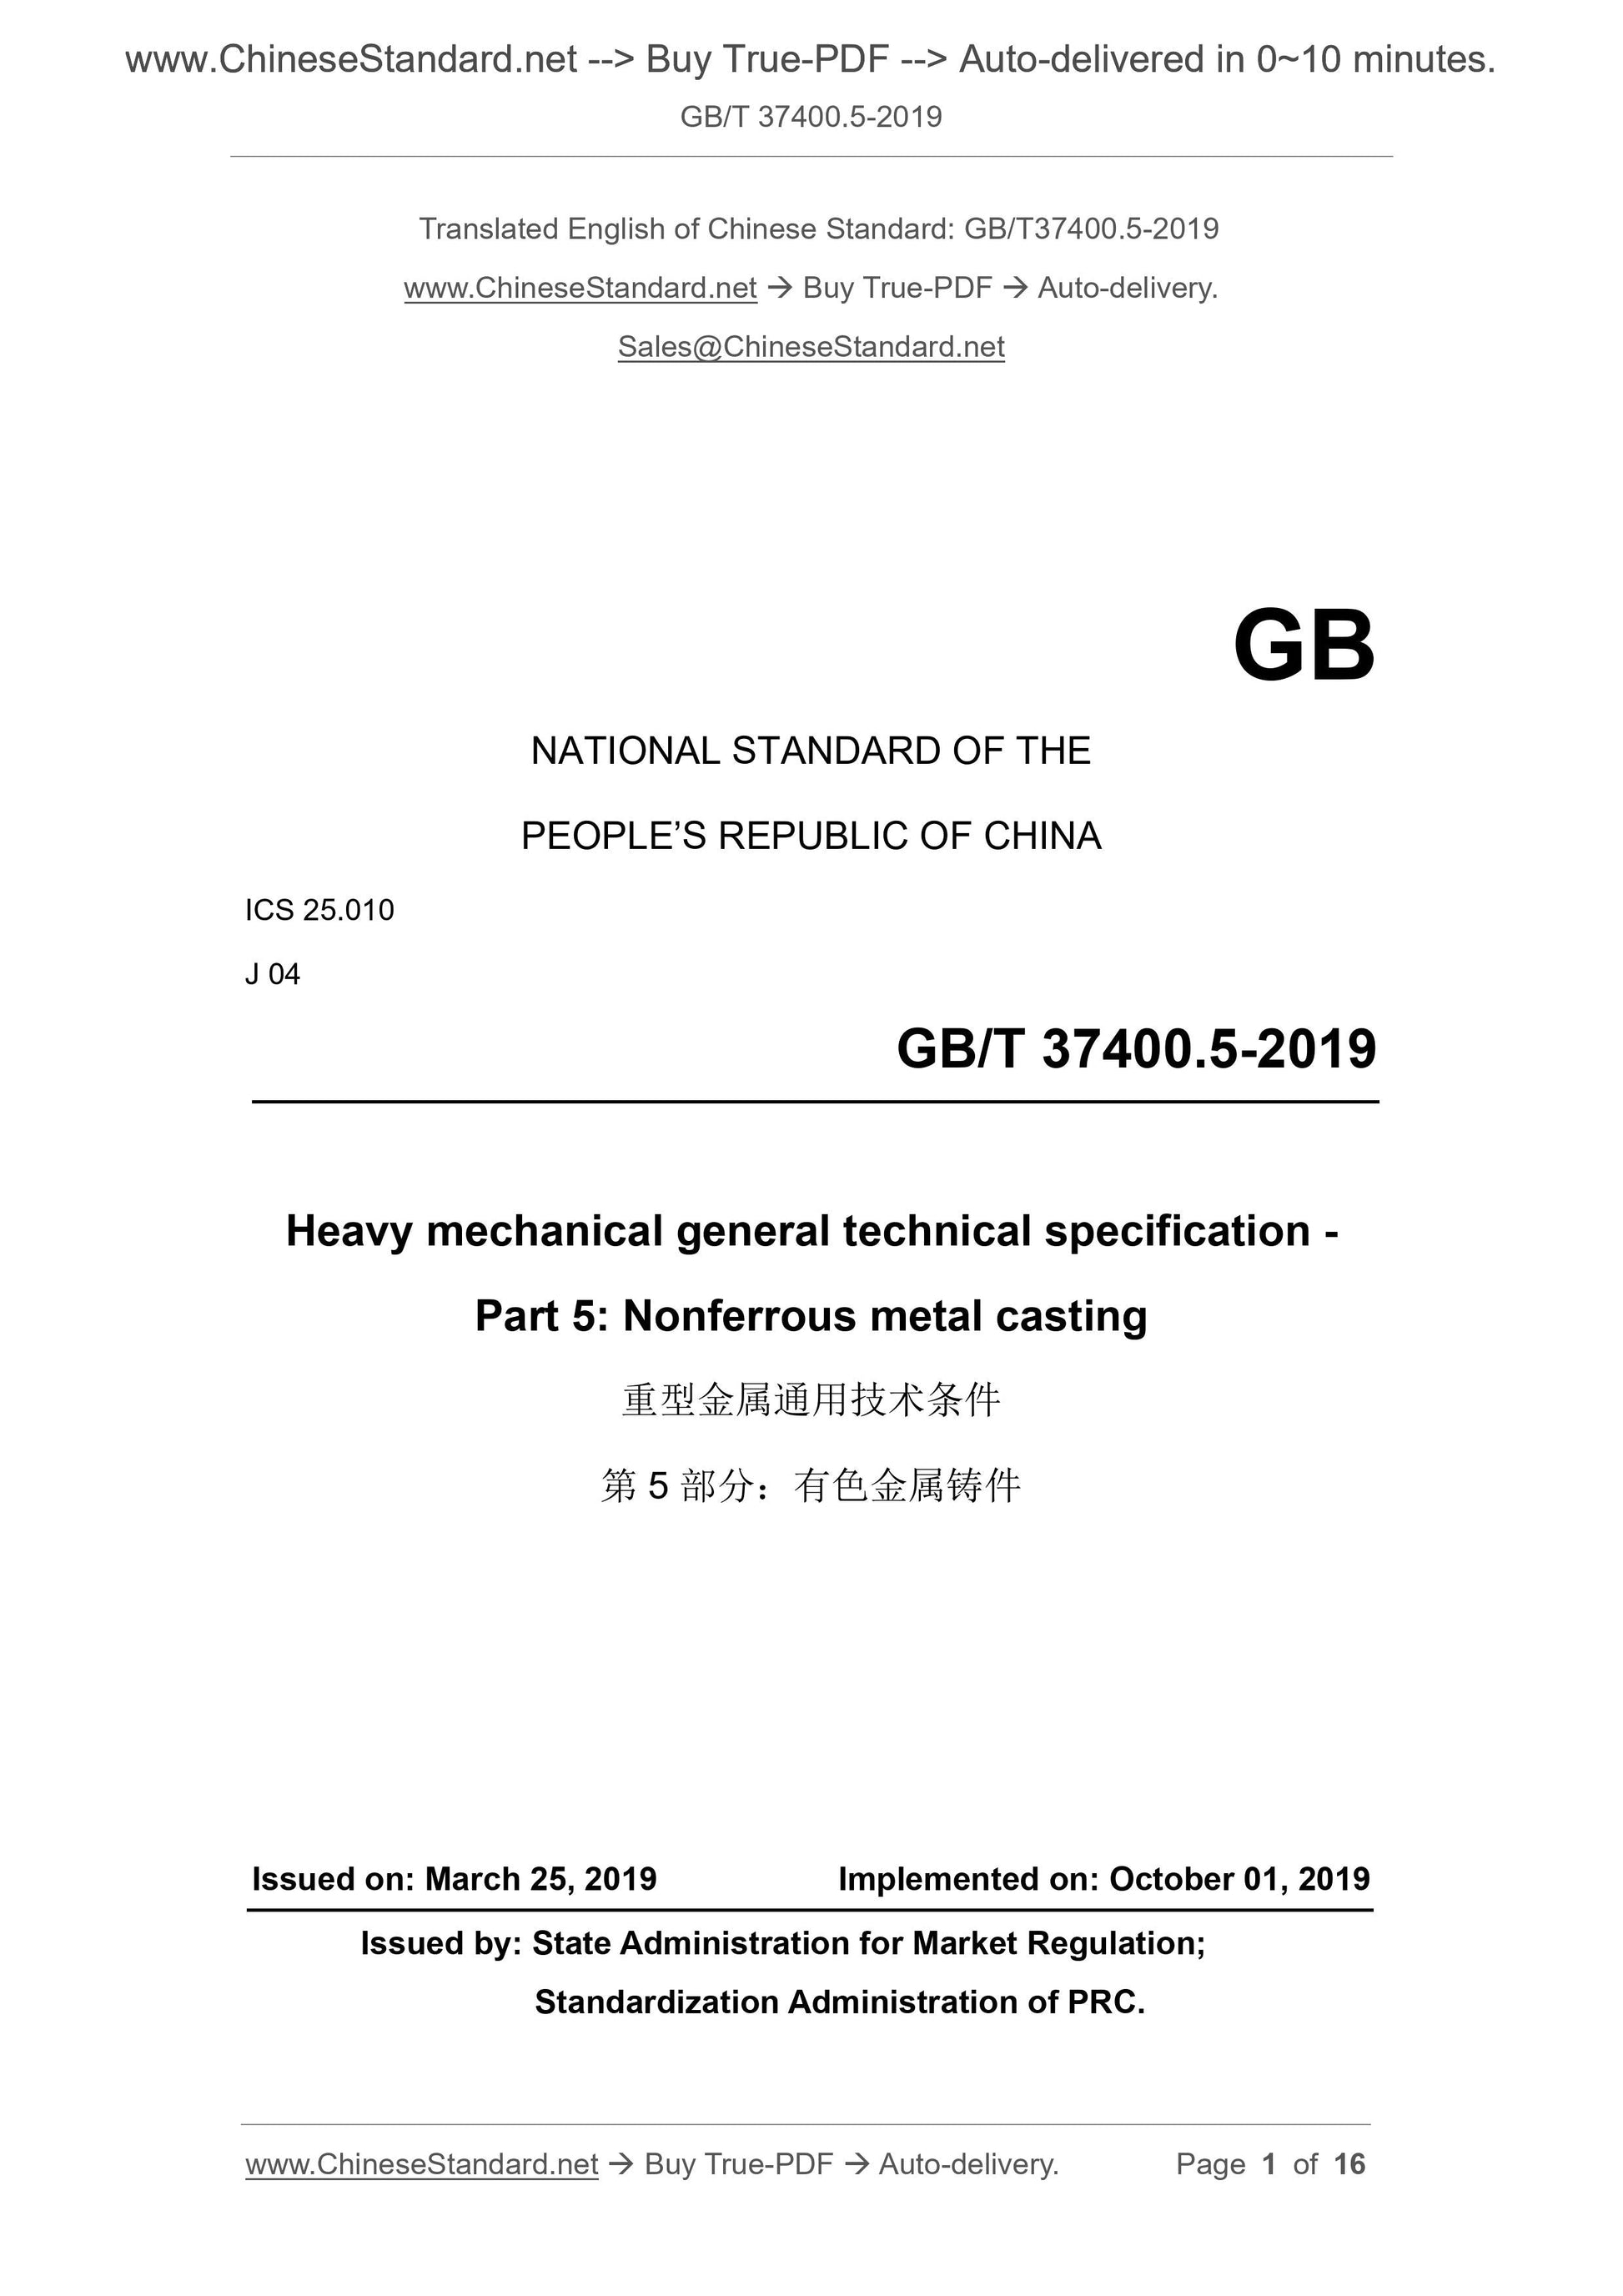 GB/T 37400.5-2019 Page 1